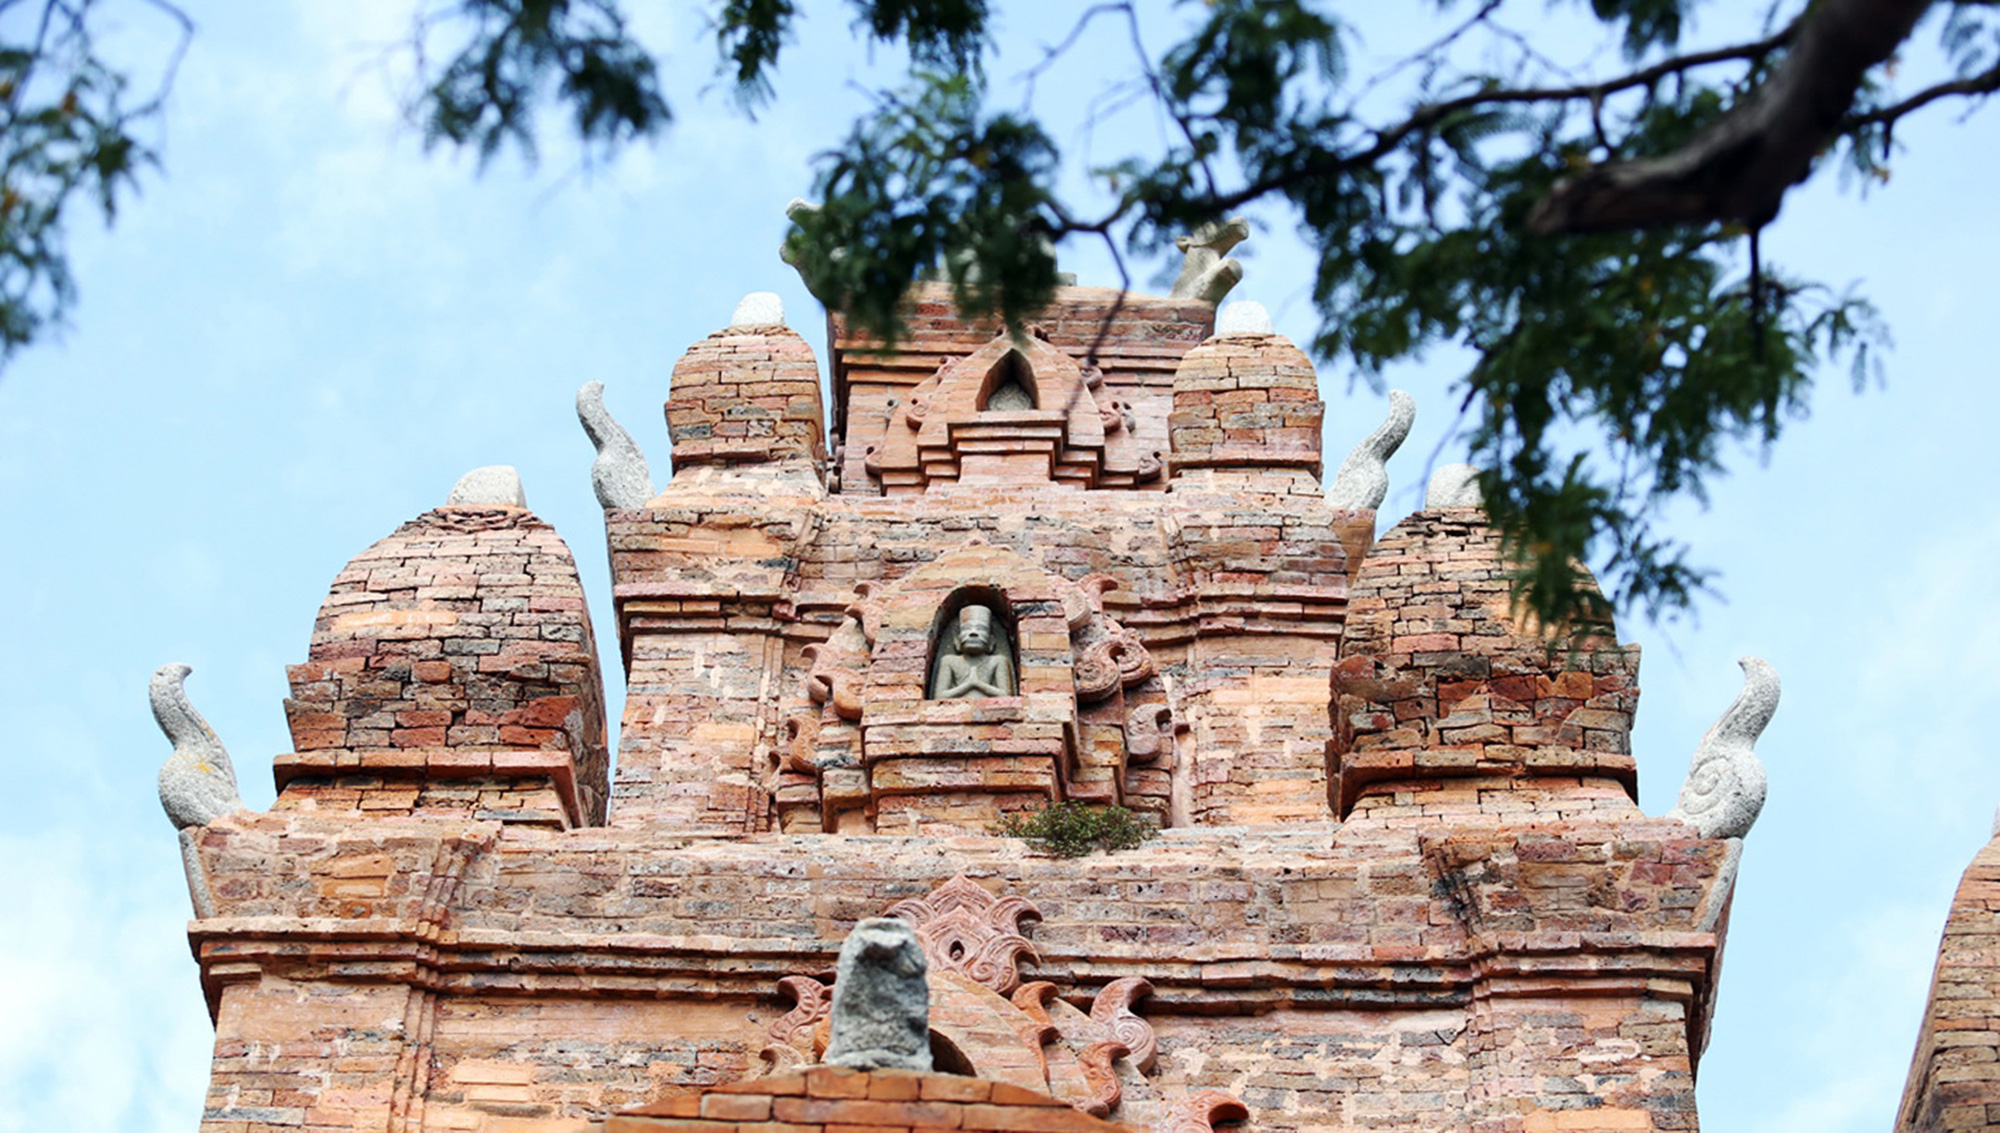 A Cham temple is seen in Ninh Thuan Province, Vietnam. Photo: Gia Tien / Tuoi Tre